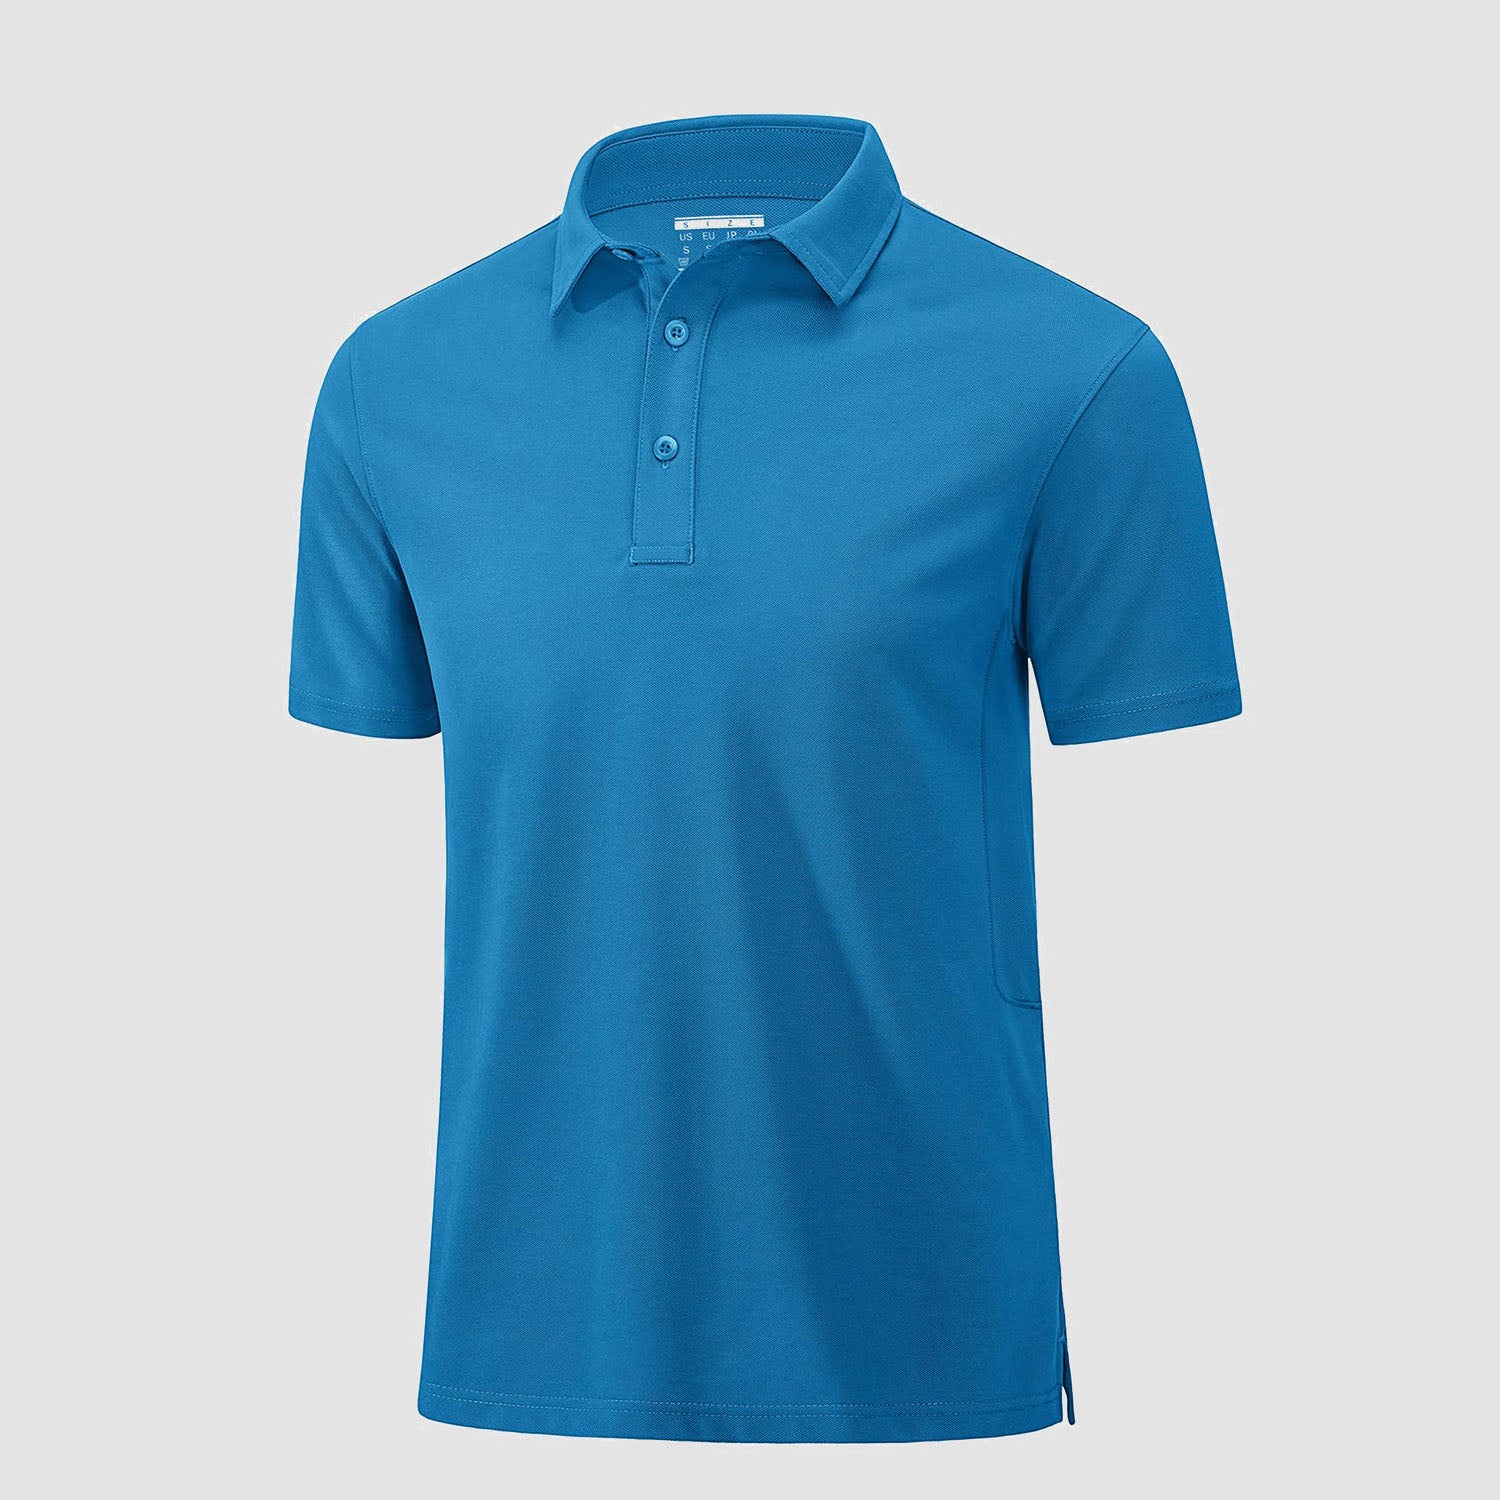 【Buy 4 Get the 4th Free！】Men's Polo Shirts Short Sleeve Cotton Golf Shirt Casual Collared Shirt Lightweight